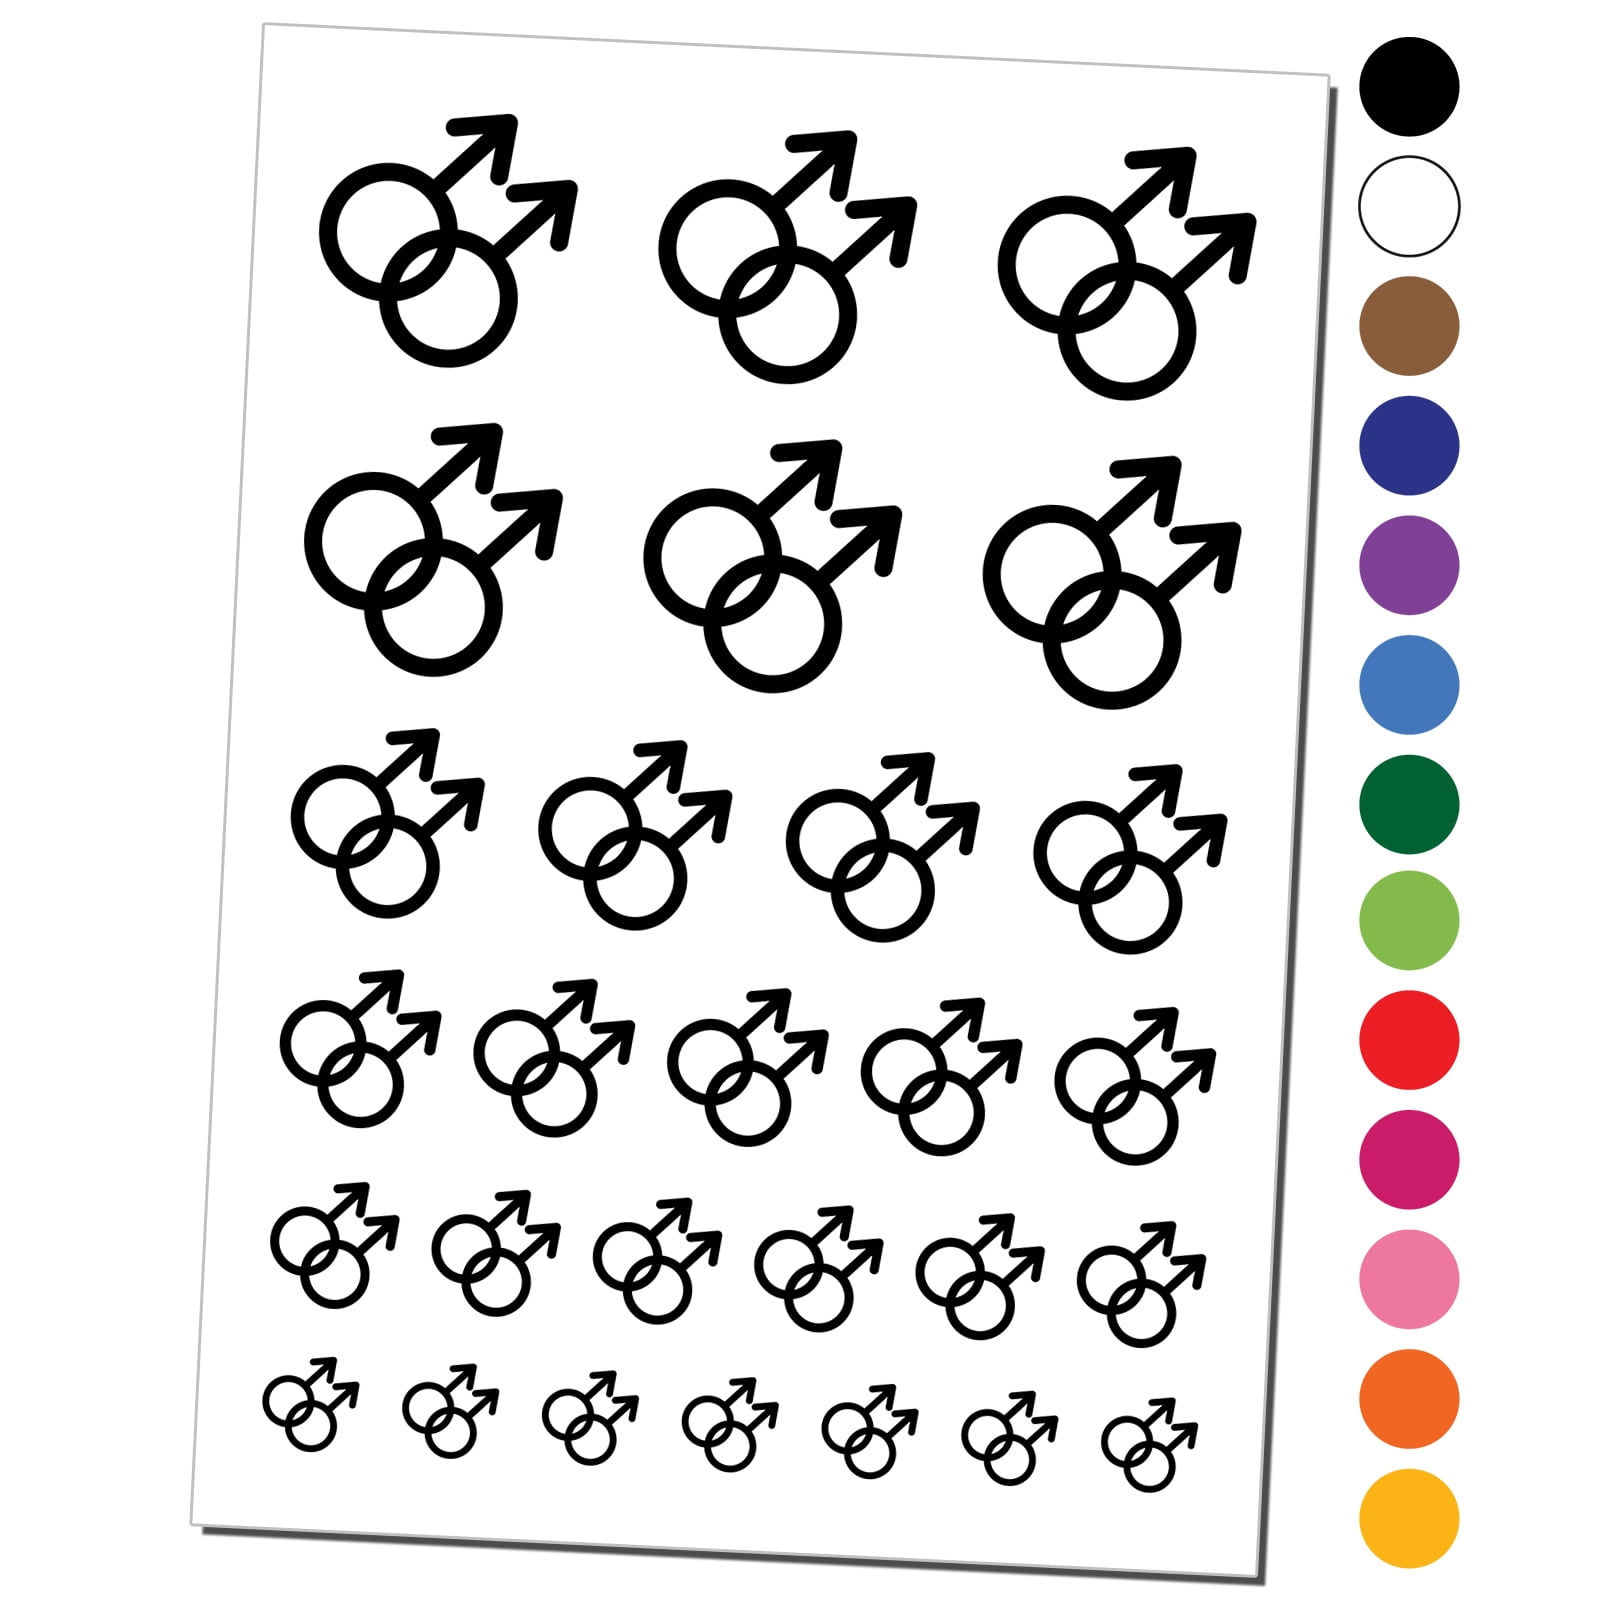 Doubled Male Sign Gay Gender Symbol Water Resistant Temporary Tattoo Set Fake Body Art Collection - Red - Walmart.com